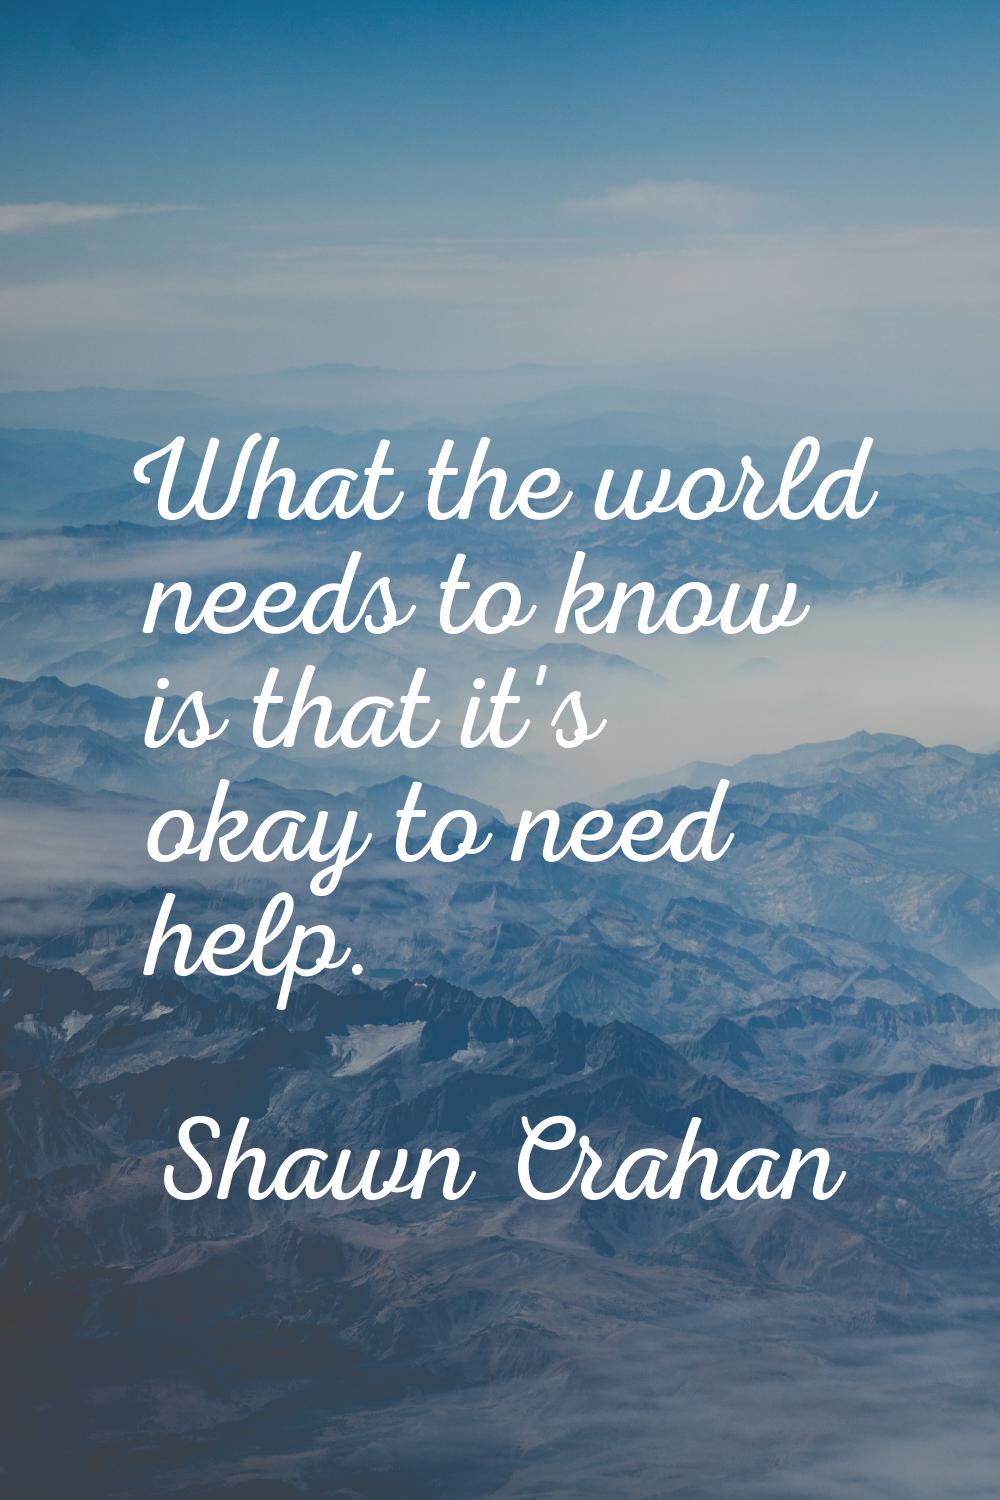 What the world needs to know is that it's okay to need help.